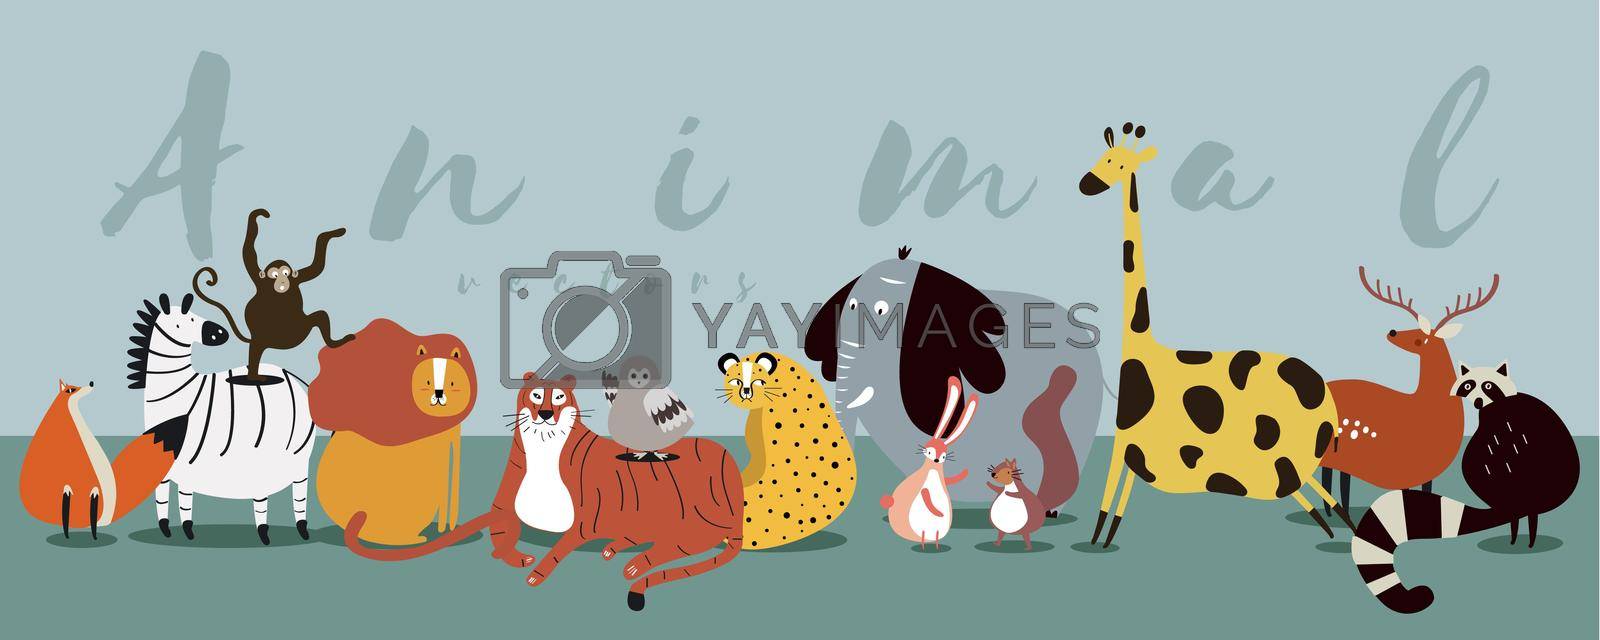 Cute group of wild animals vector